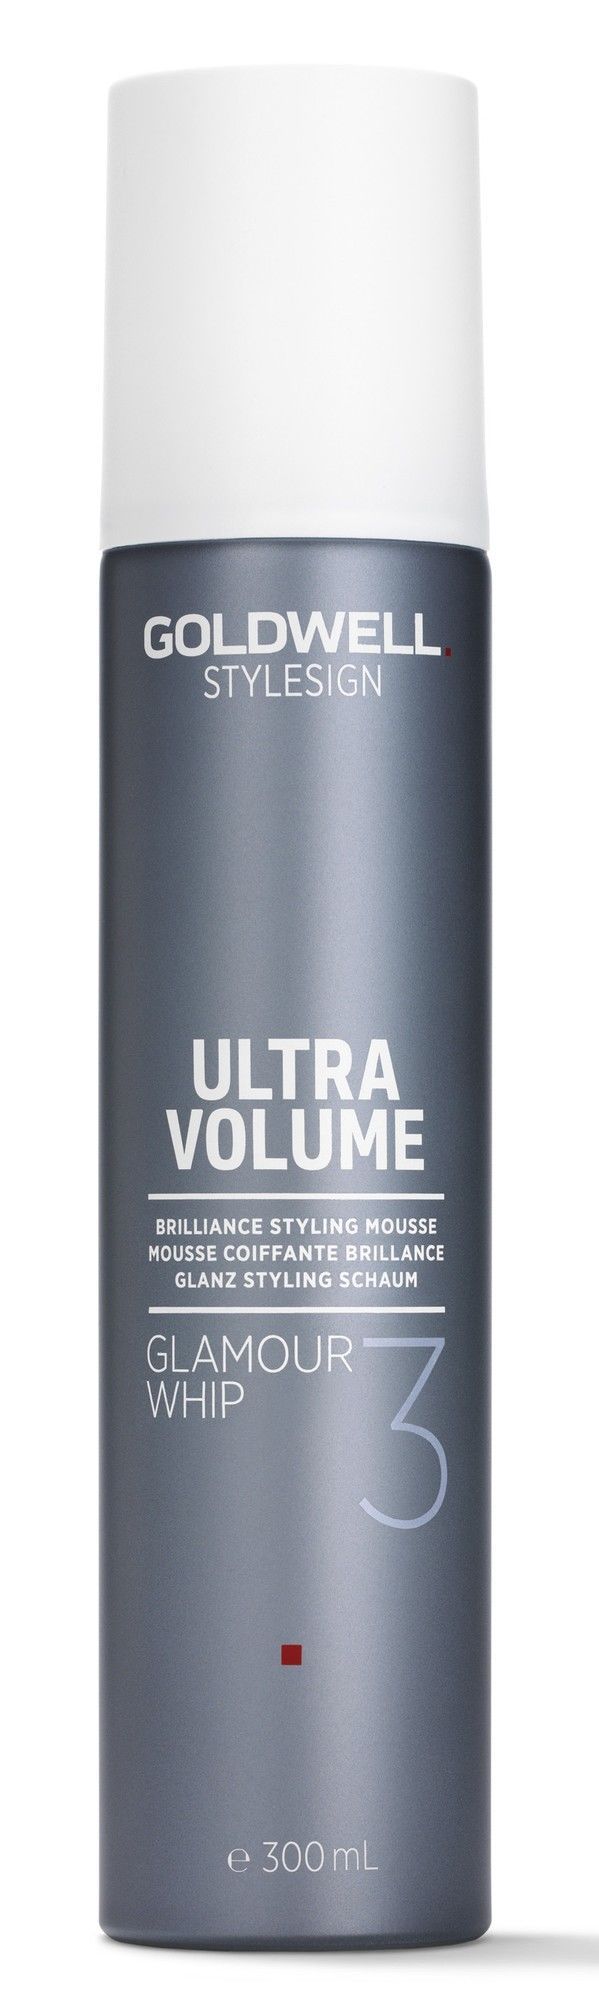 Goldwell Ultra Volume Glamour Whip Mousse Nr3 300ml